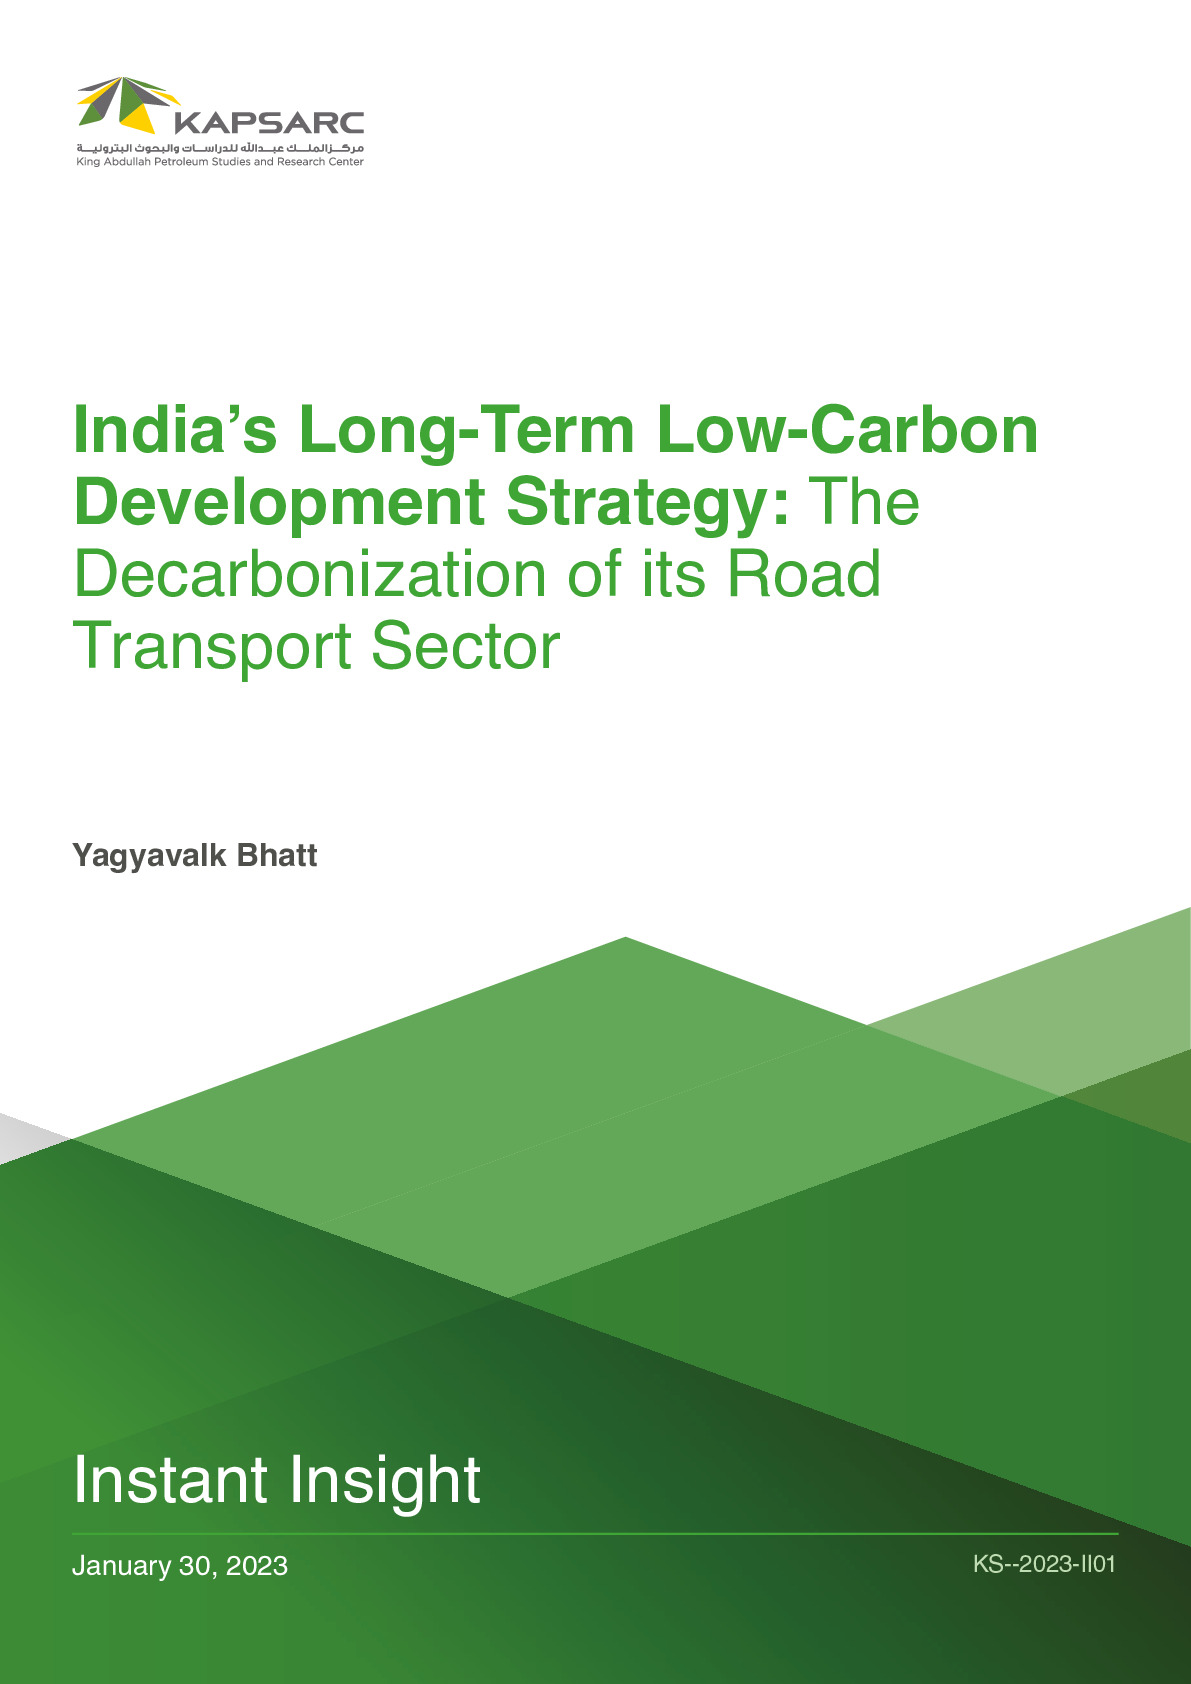 India’s Long-Term Low-Carbon Development Strategy: The Decarbonization of its Road Transport Sector